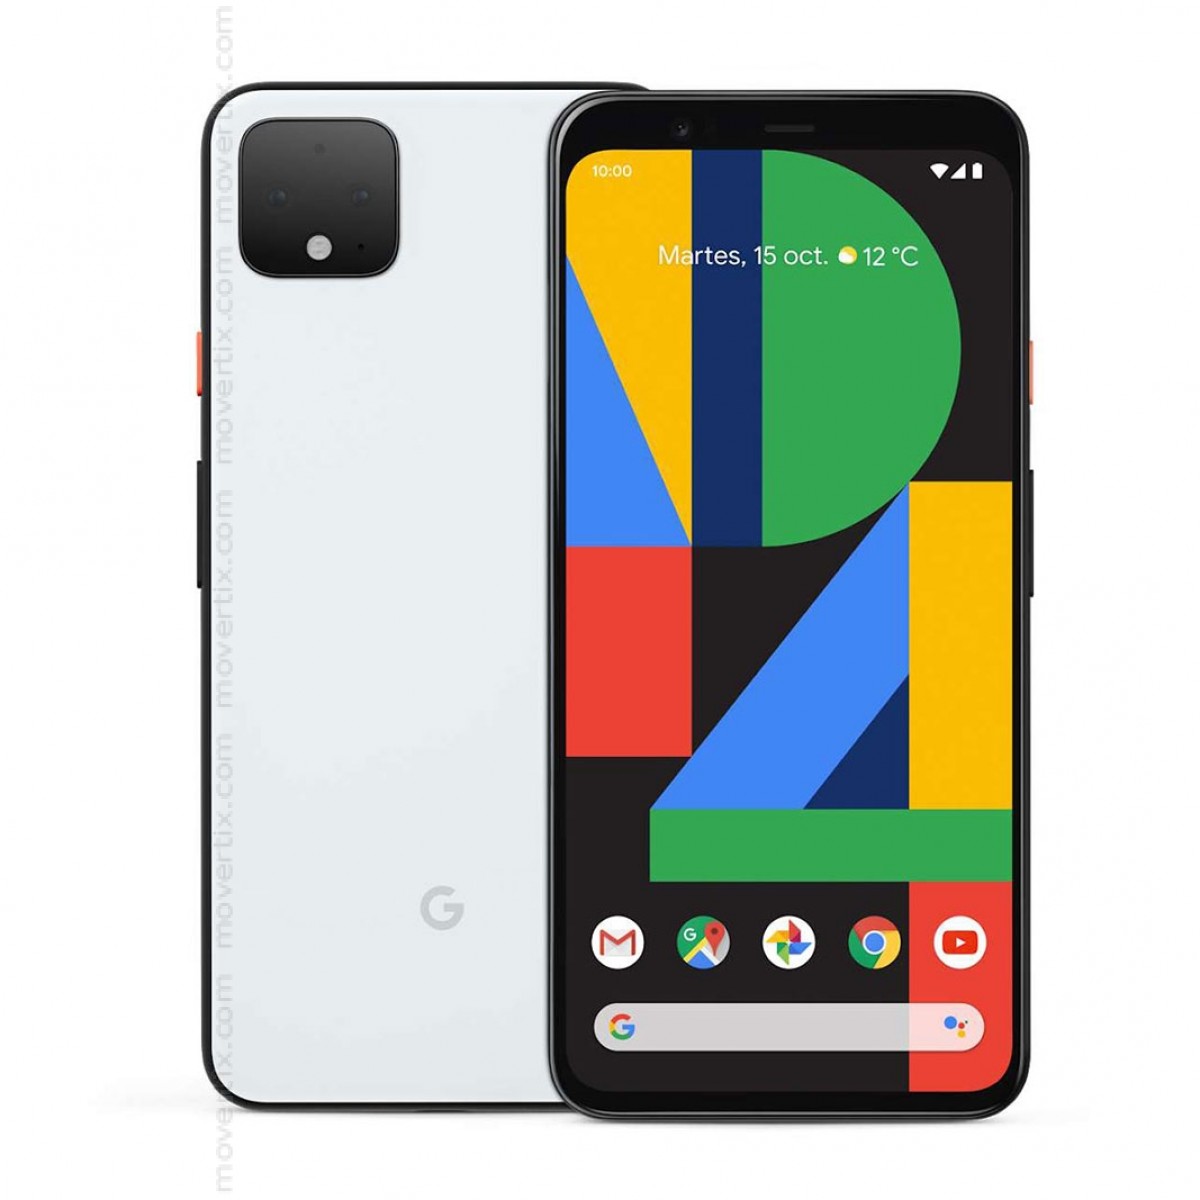 Google Pixel 5a specifications and price, and its most important